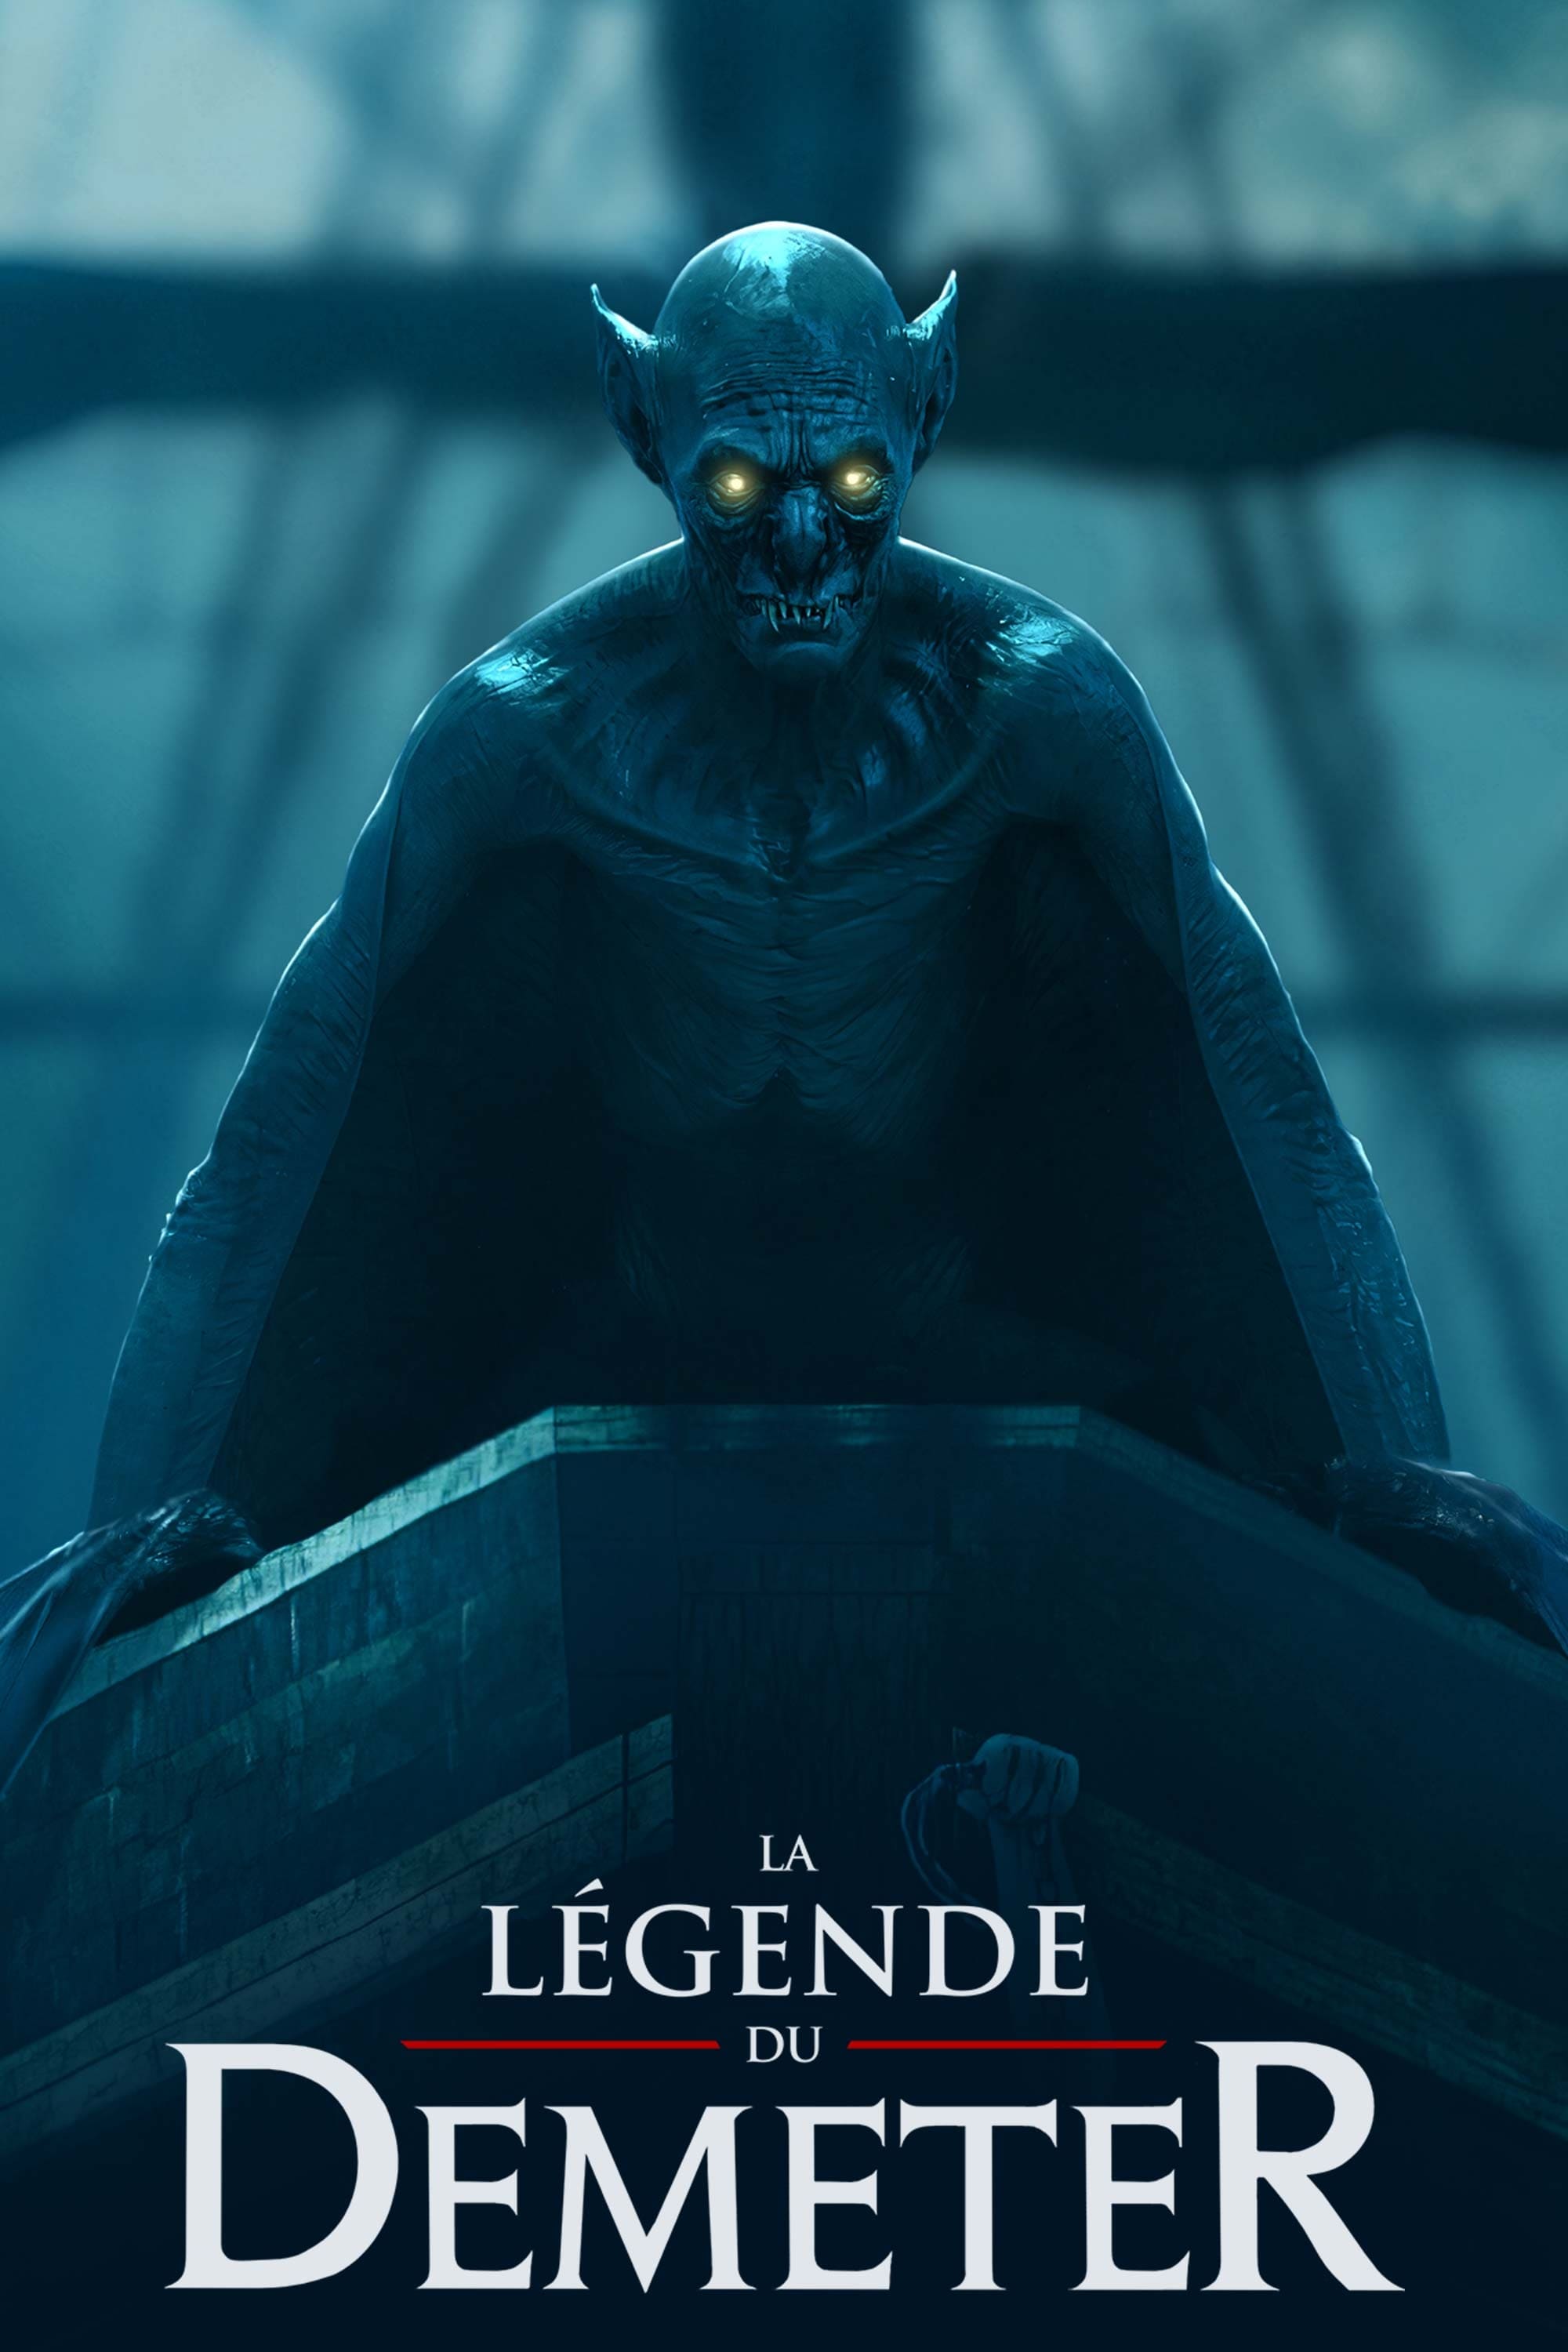 Poster and image movie The Last Voyage of the Demeter